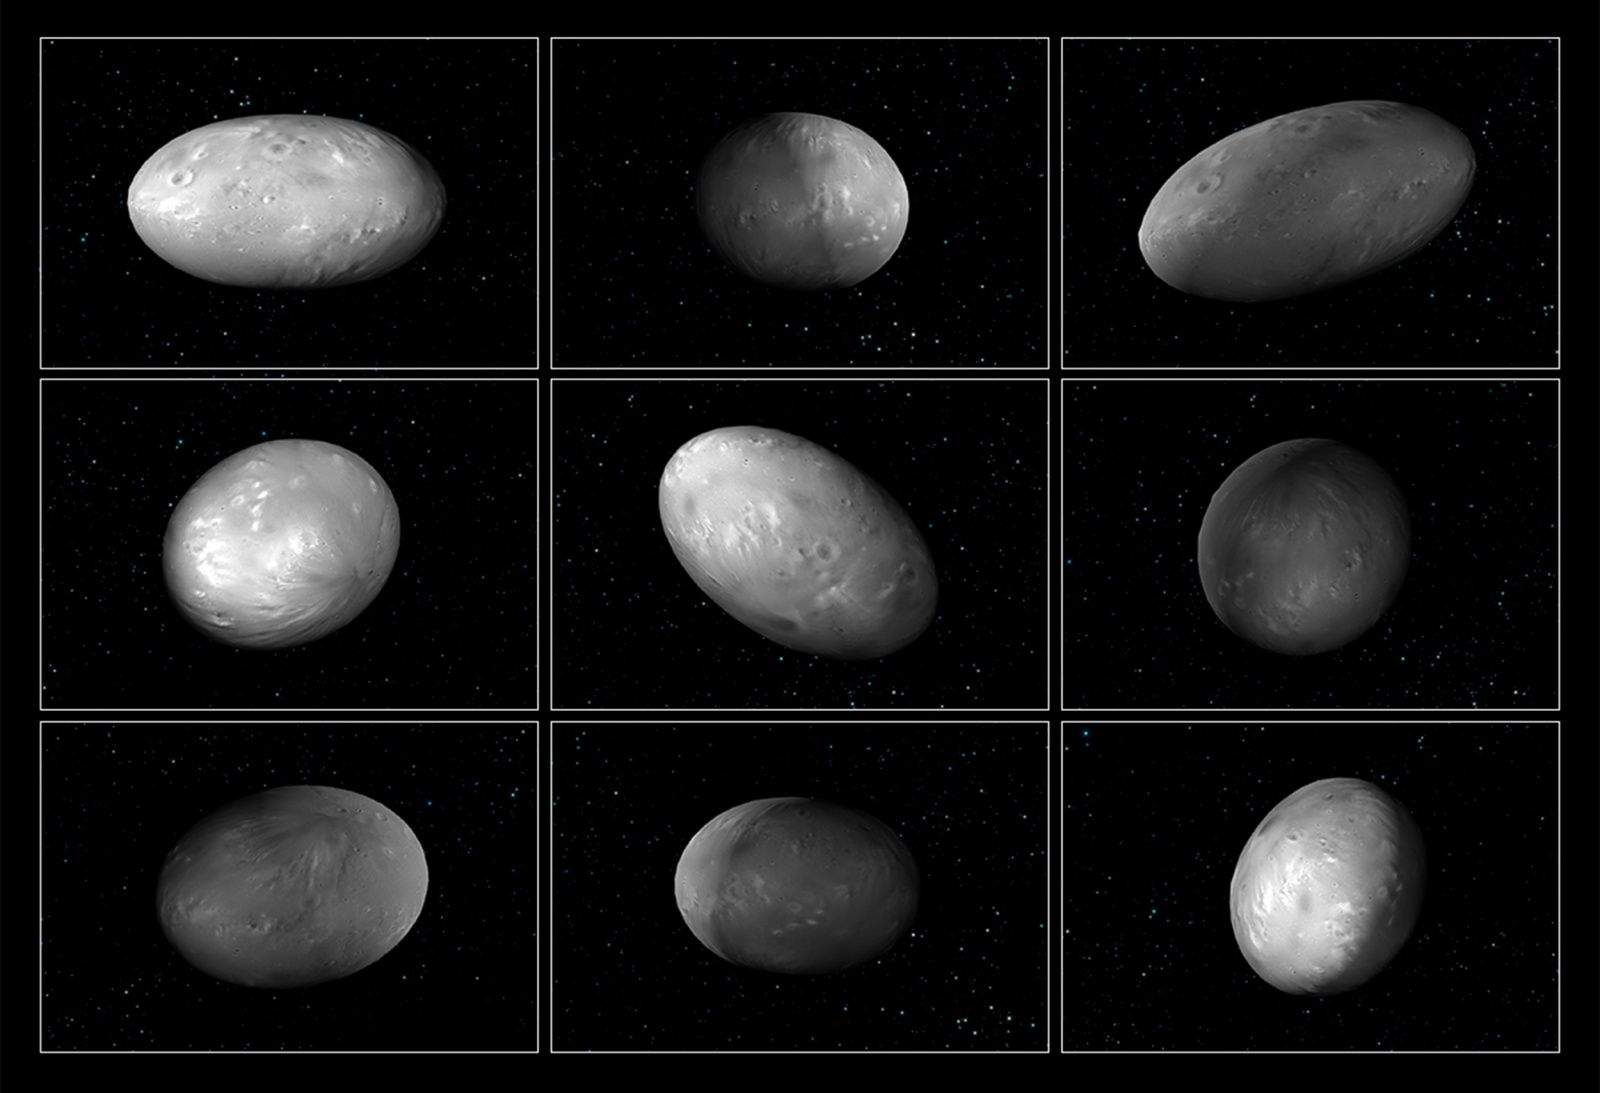 An artist's rendering shows the wobbble and oblong shape of Pluto's moon, Nix.